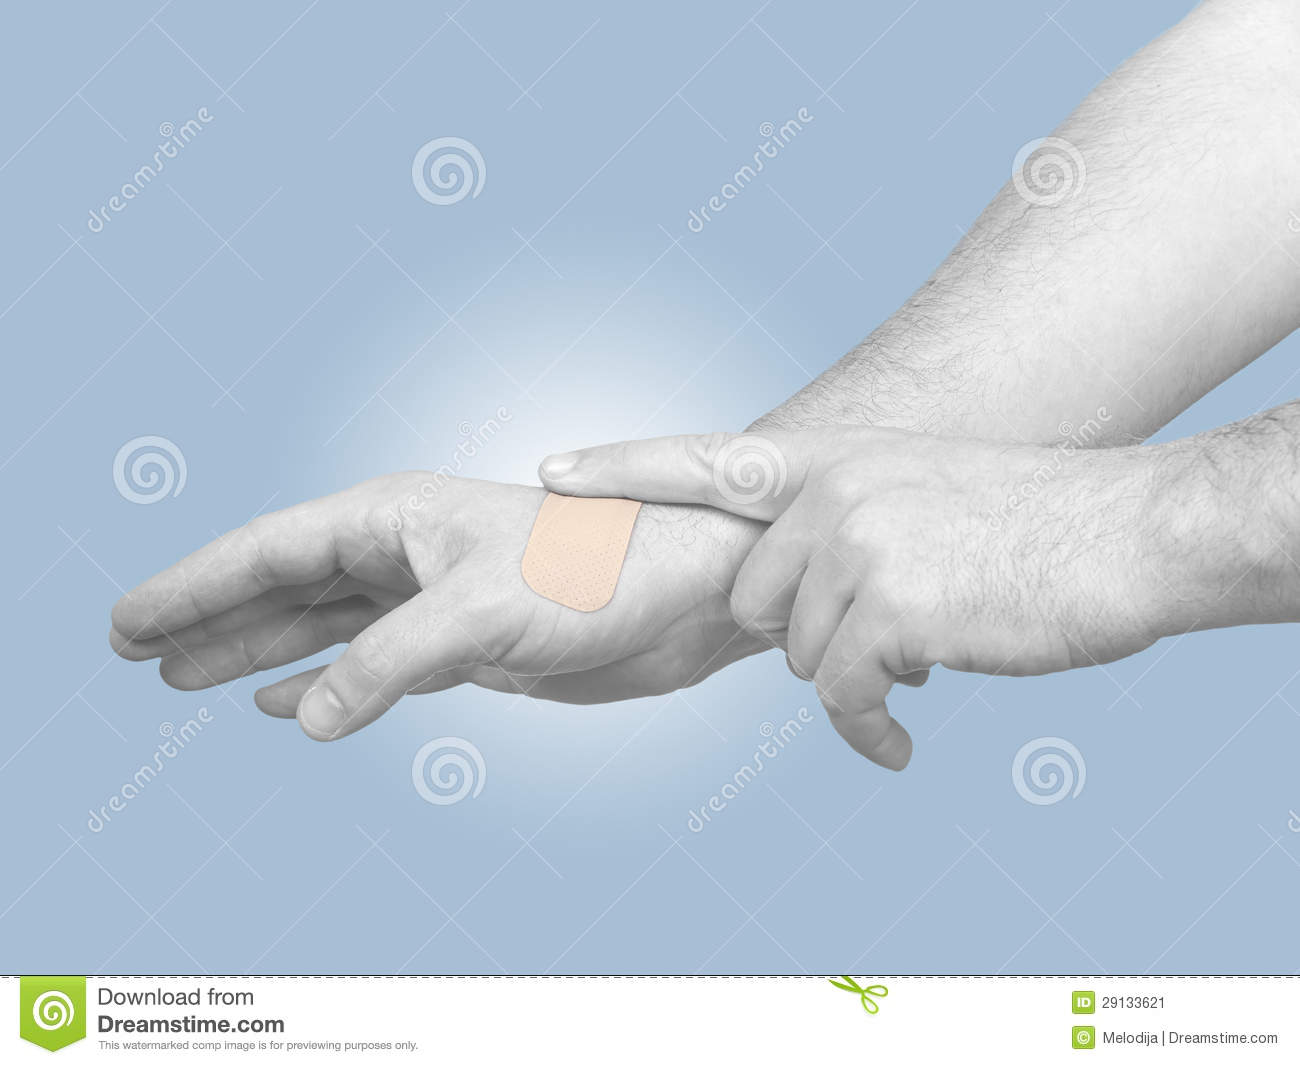 Hand Putting Adhesive Bandage On Hand  Concept Photo With Color